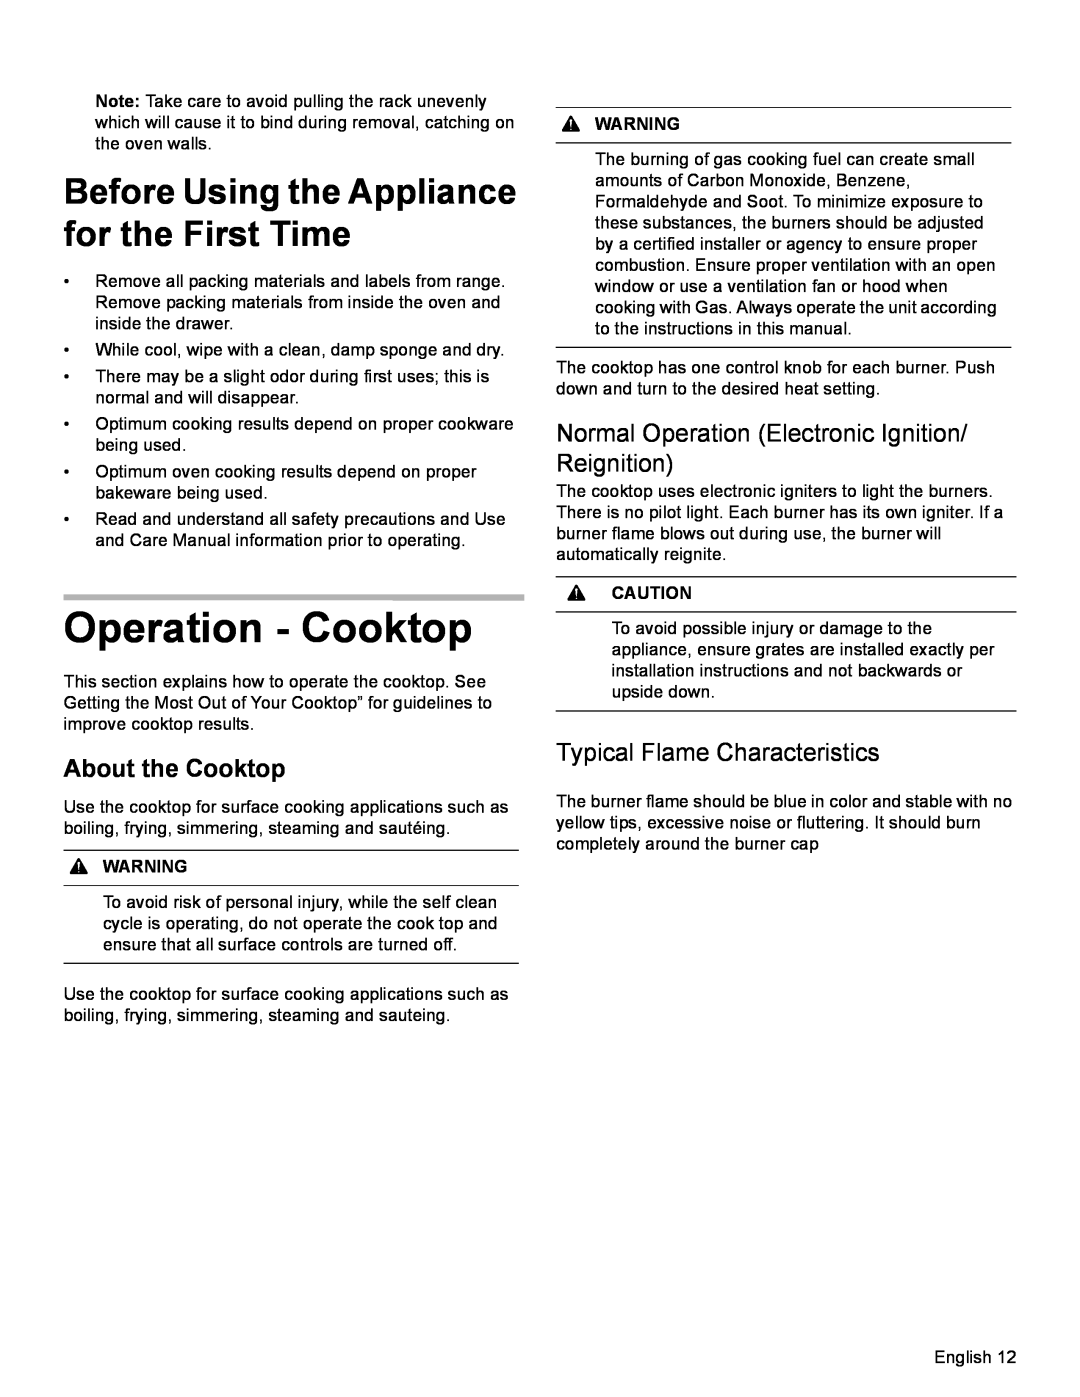 Bosch Appliances HDI8054U Operation - Cooktop, Before Using the Appliance for the First Time, About the Cooktop, Warning 